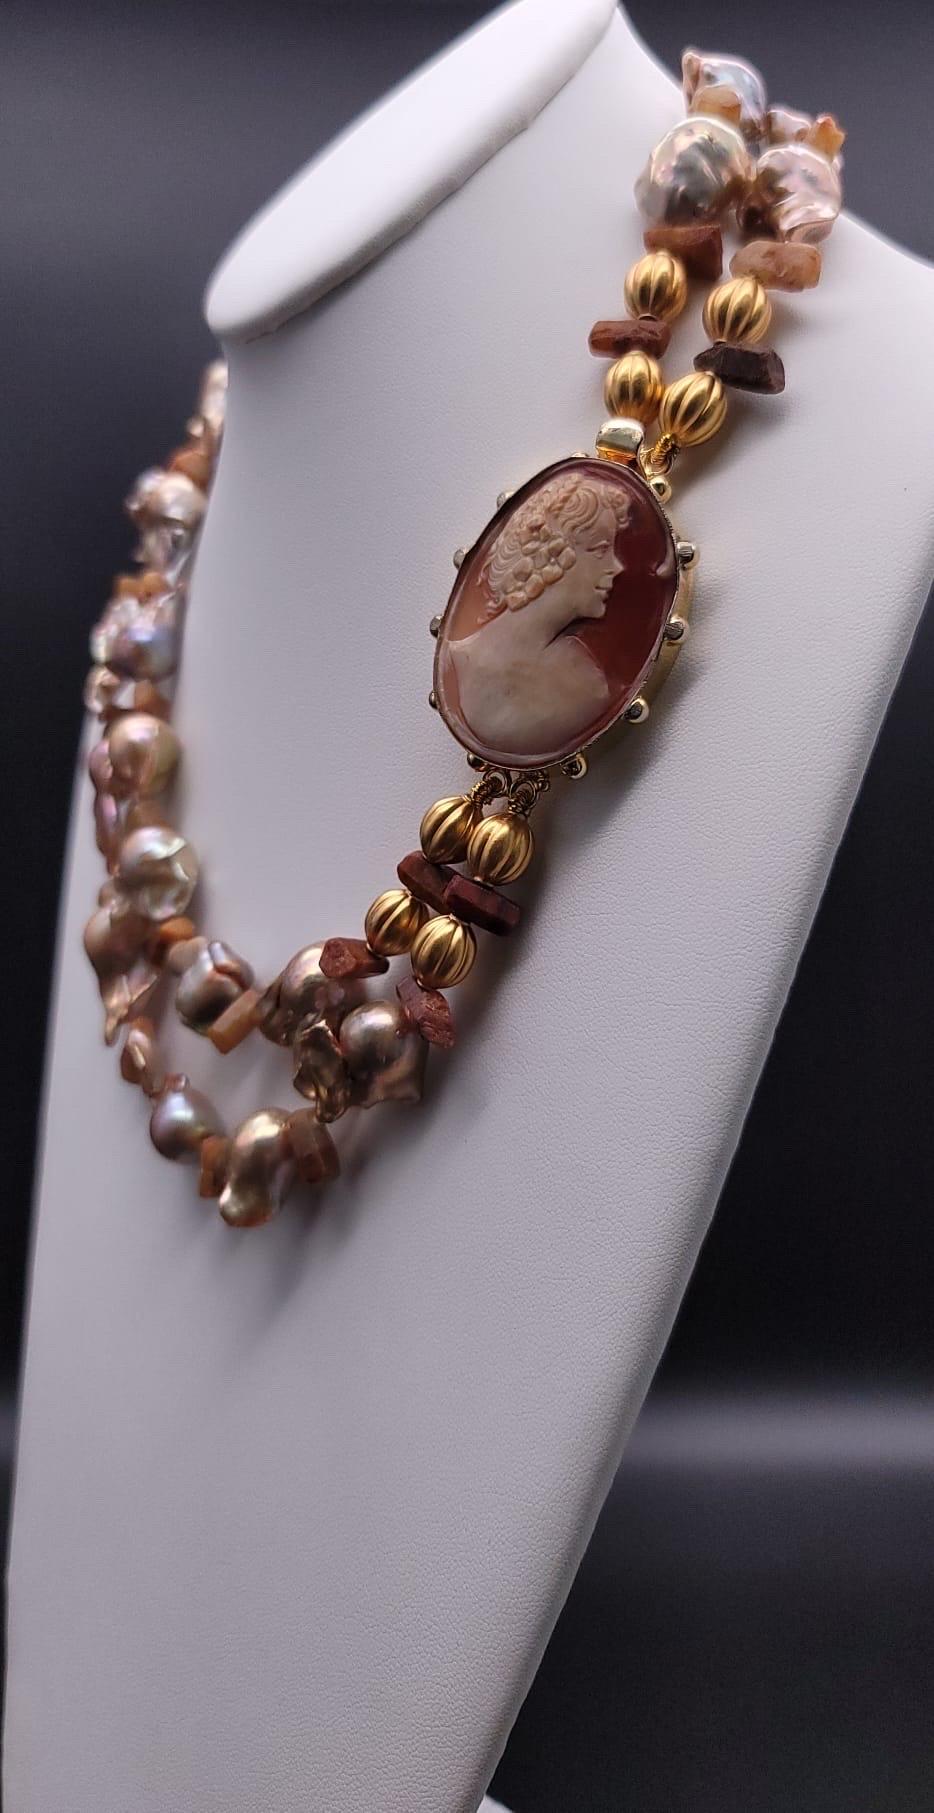 A.Jeschel Stunning Gold Baroque Pearl necklace with an Italian cameo side clasp. 5